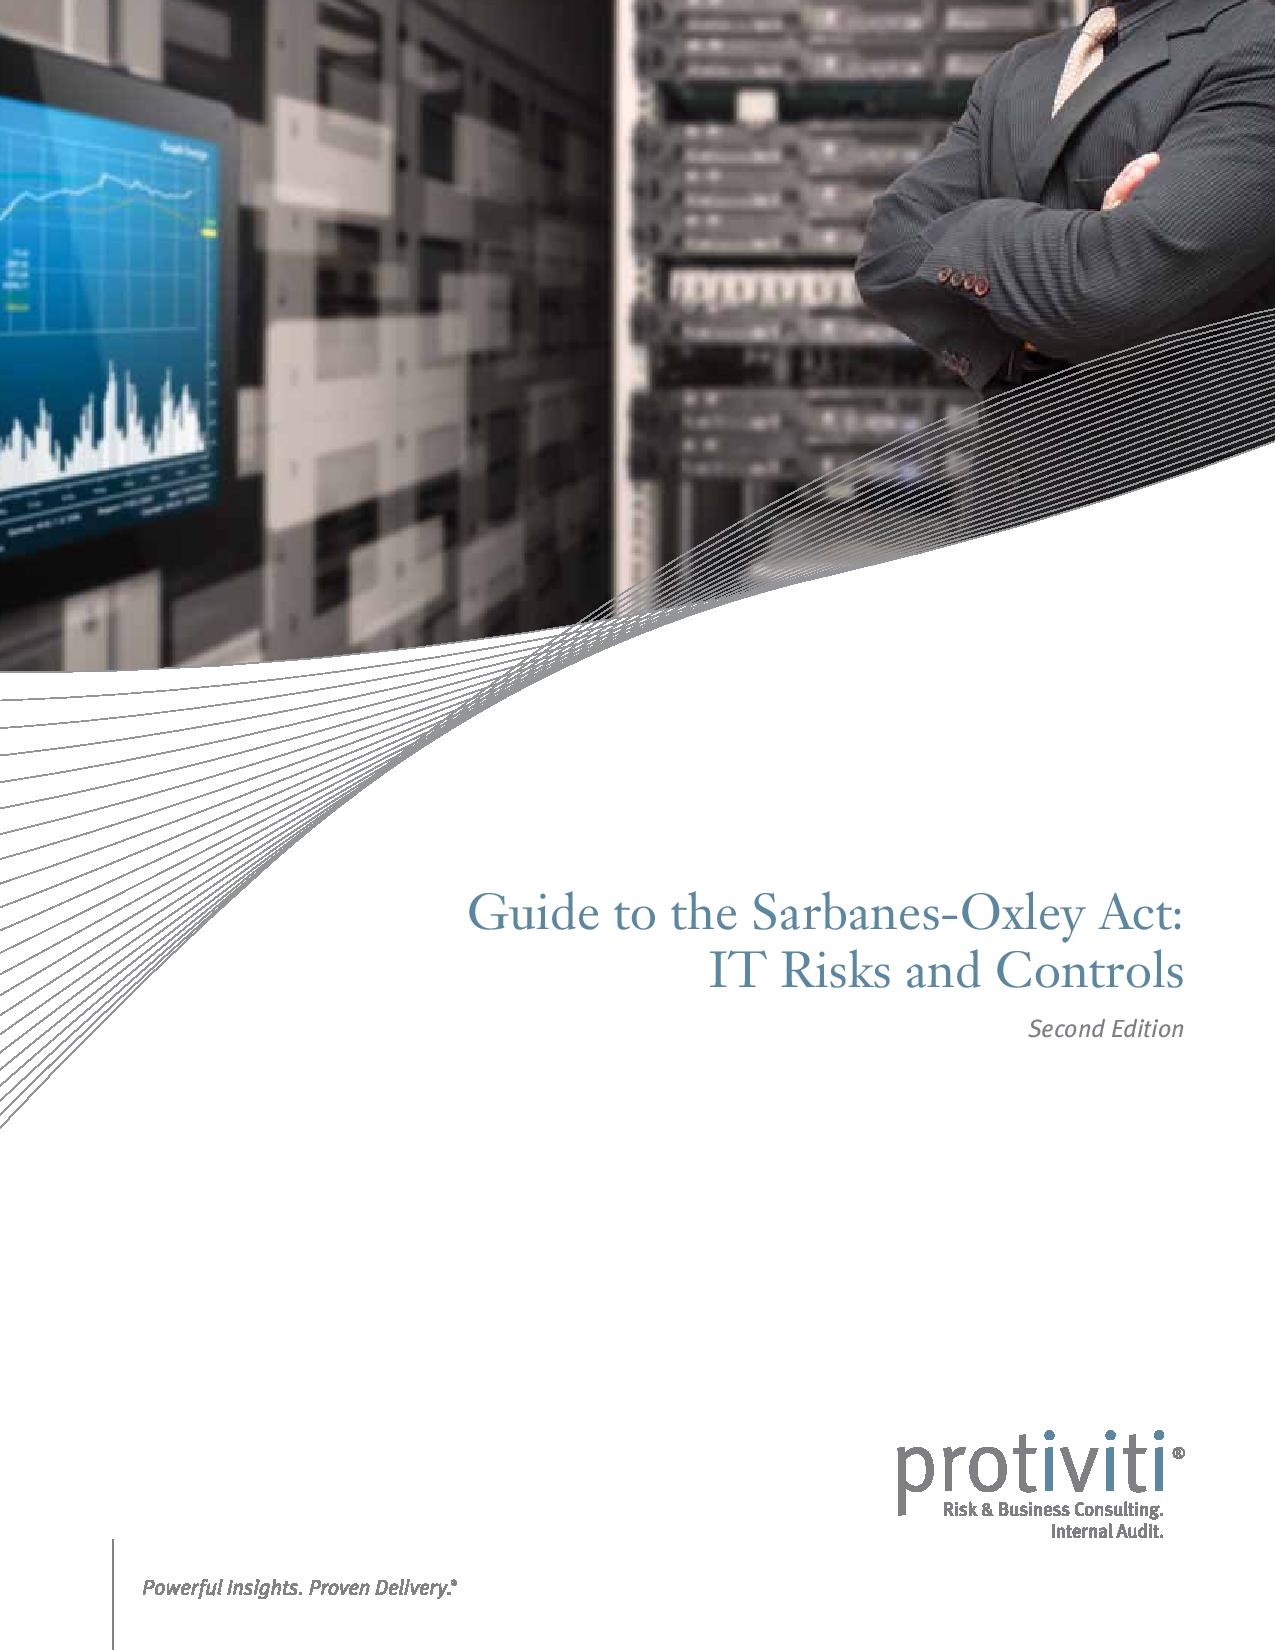 Screenshot of the first page of Guide to the Sarbanes-Oxley Act IT Risks and Controls Second Edition